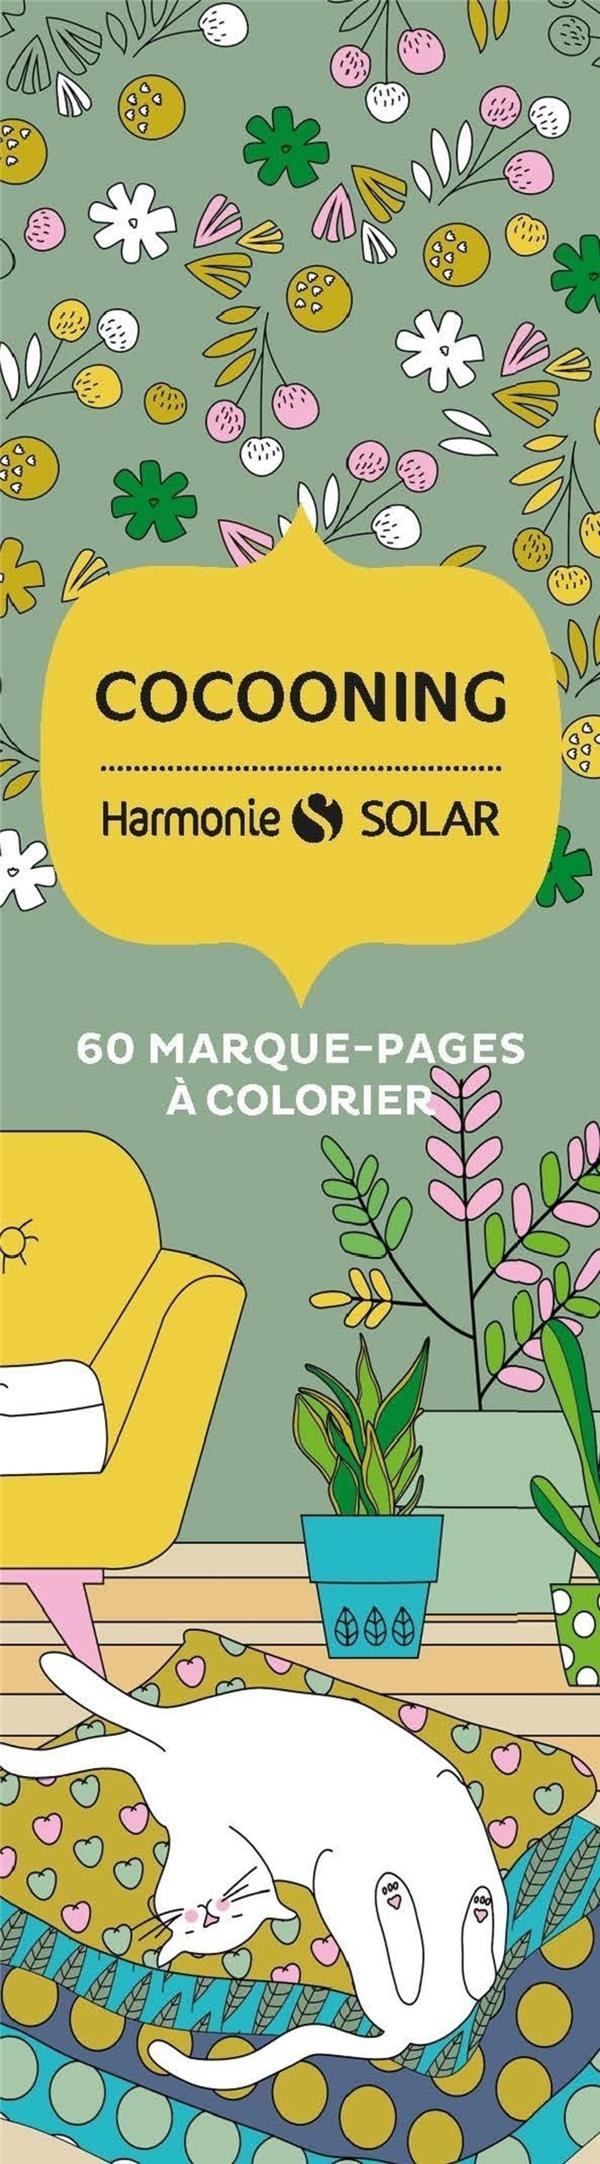 COCOONING - 60 MARQUE-PAGES A COLORIER